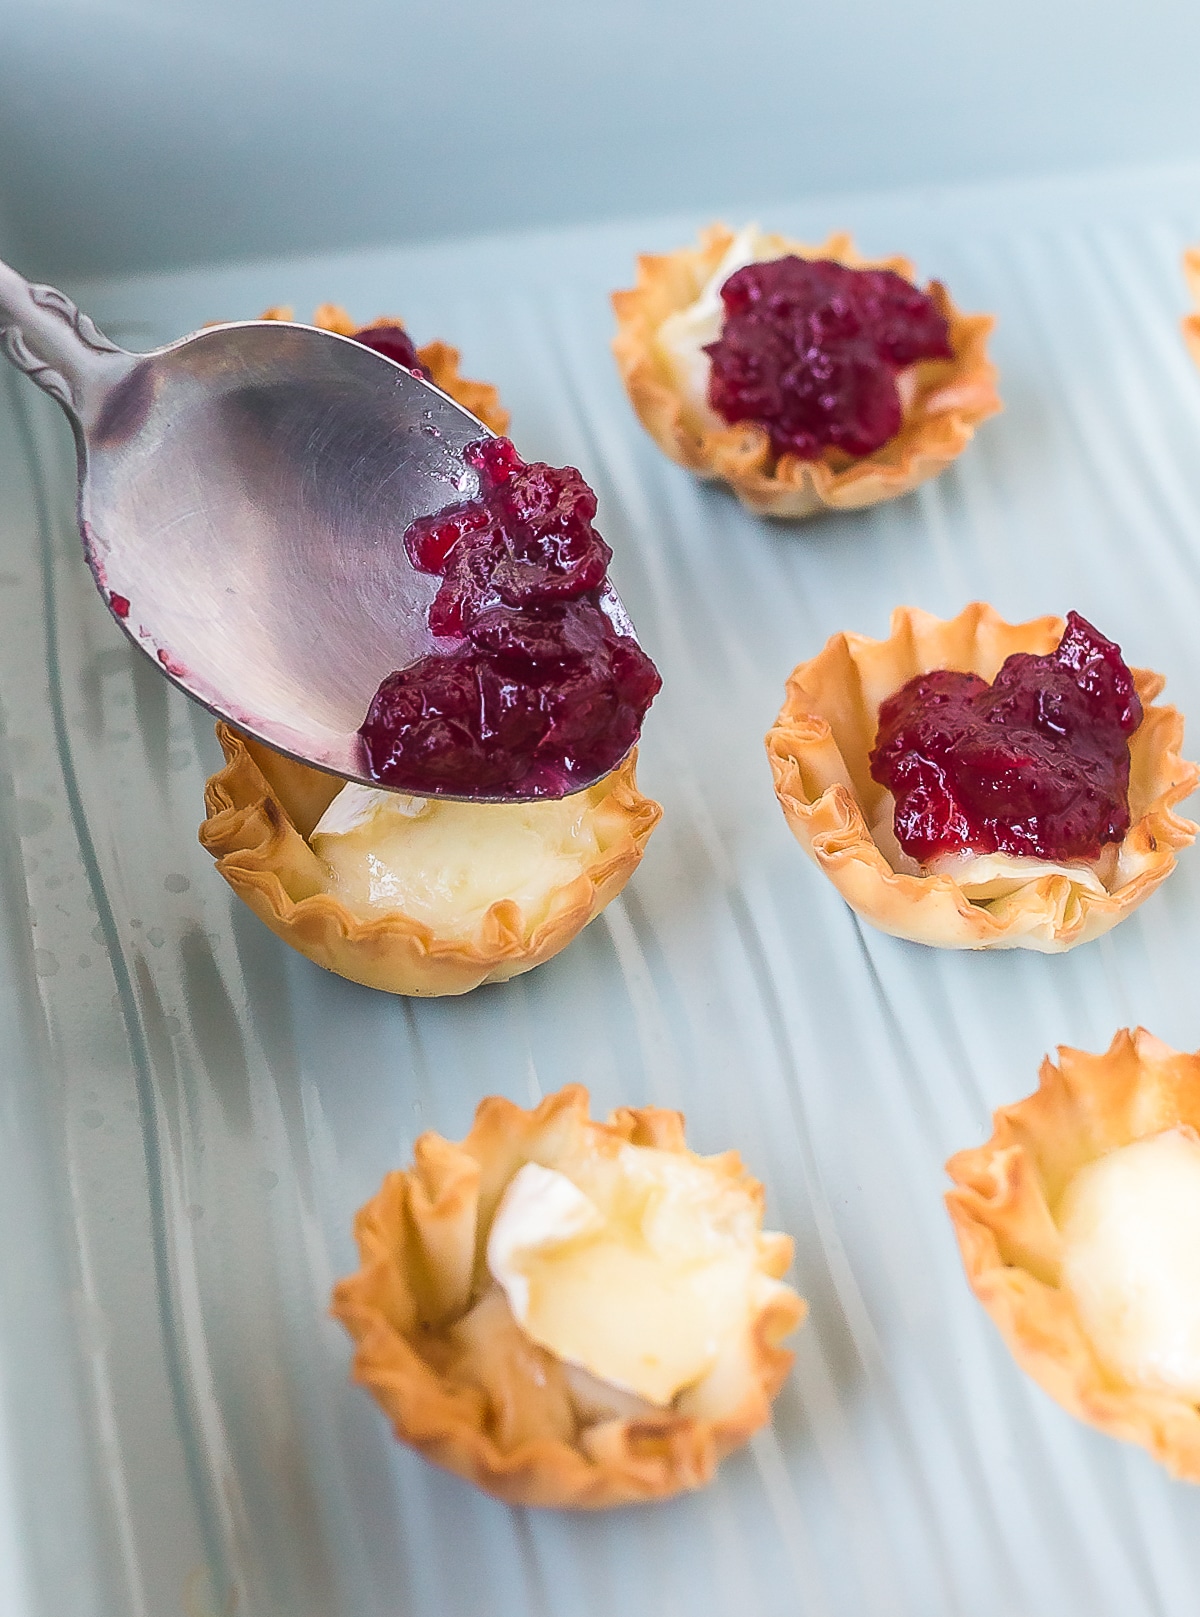 How To: Baked Brie Bites with Cranberry Sauce Recipe #ASpicyPerspective #brie #baked #cranberry 